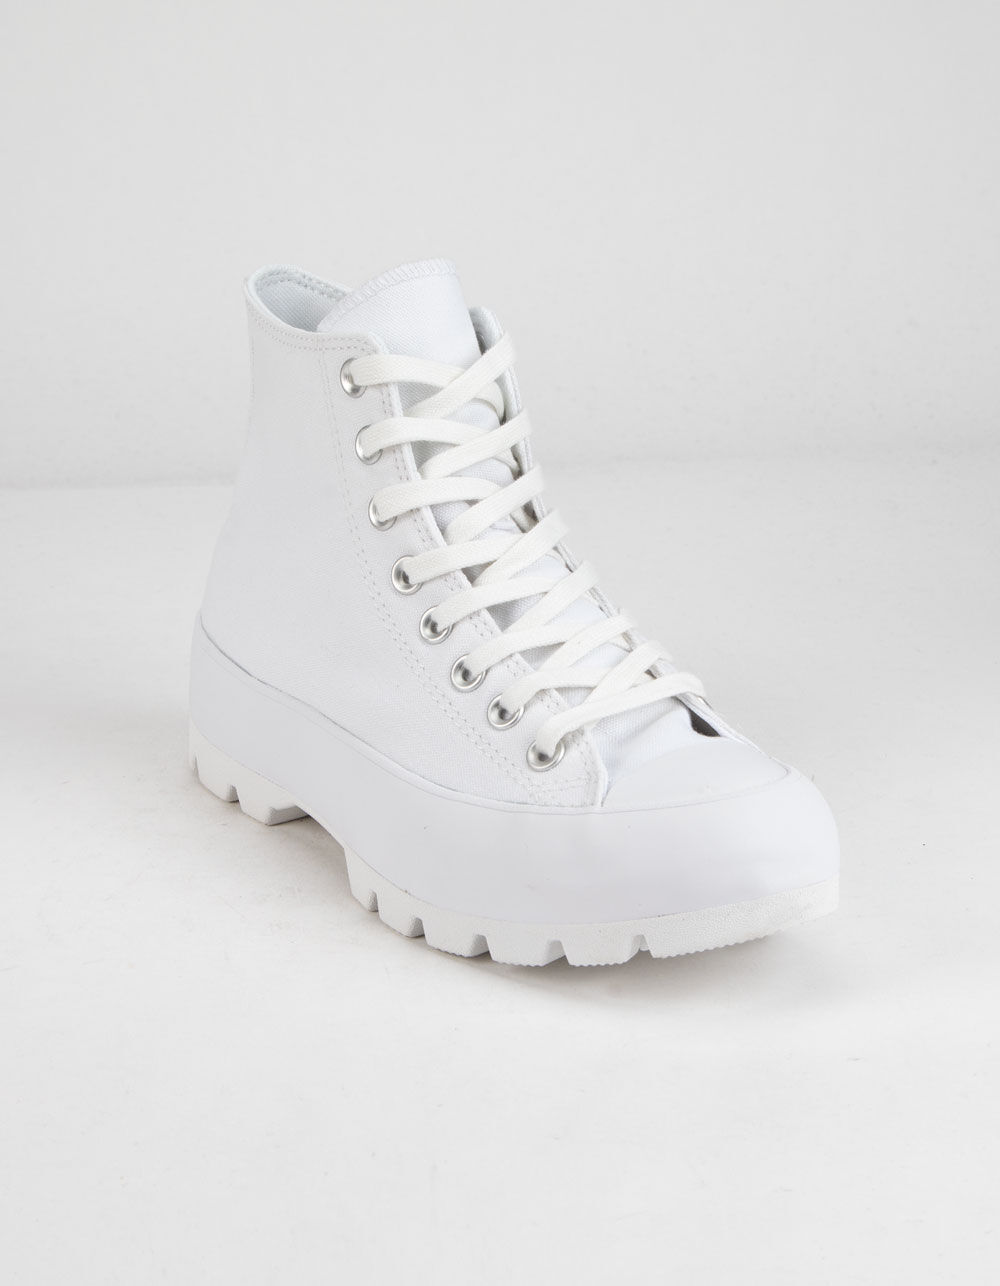 Converse Chuck Taylor All Star High Lugged 'White' Sneaker | Women's Size 10